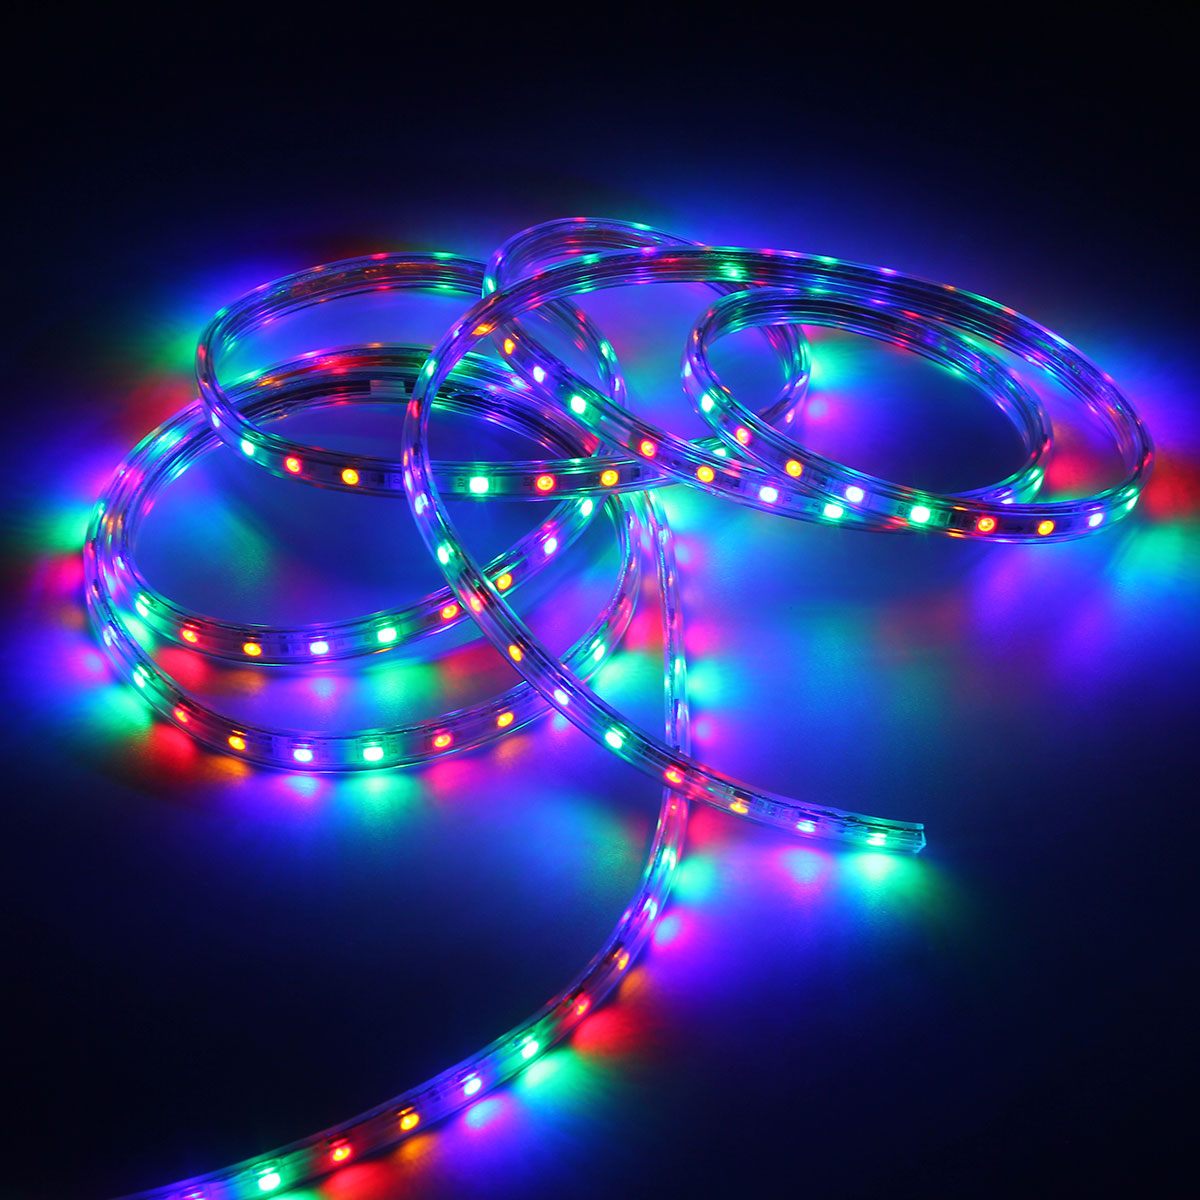 220V-3M-5050-LED-SMD-Outdoor-Waterproof-Flexible-Tape-Rope-Strip-Light-Xmas-1066318-6